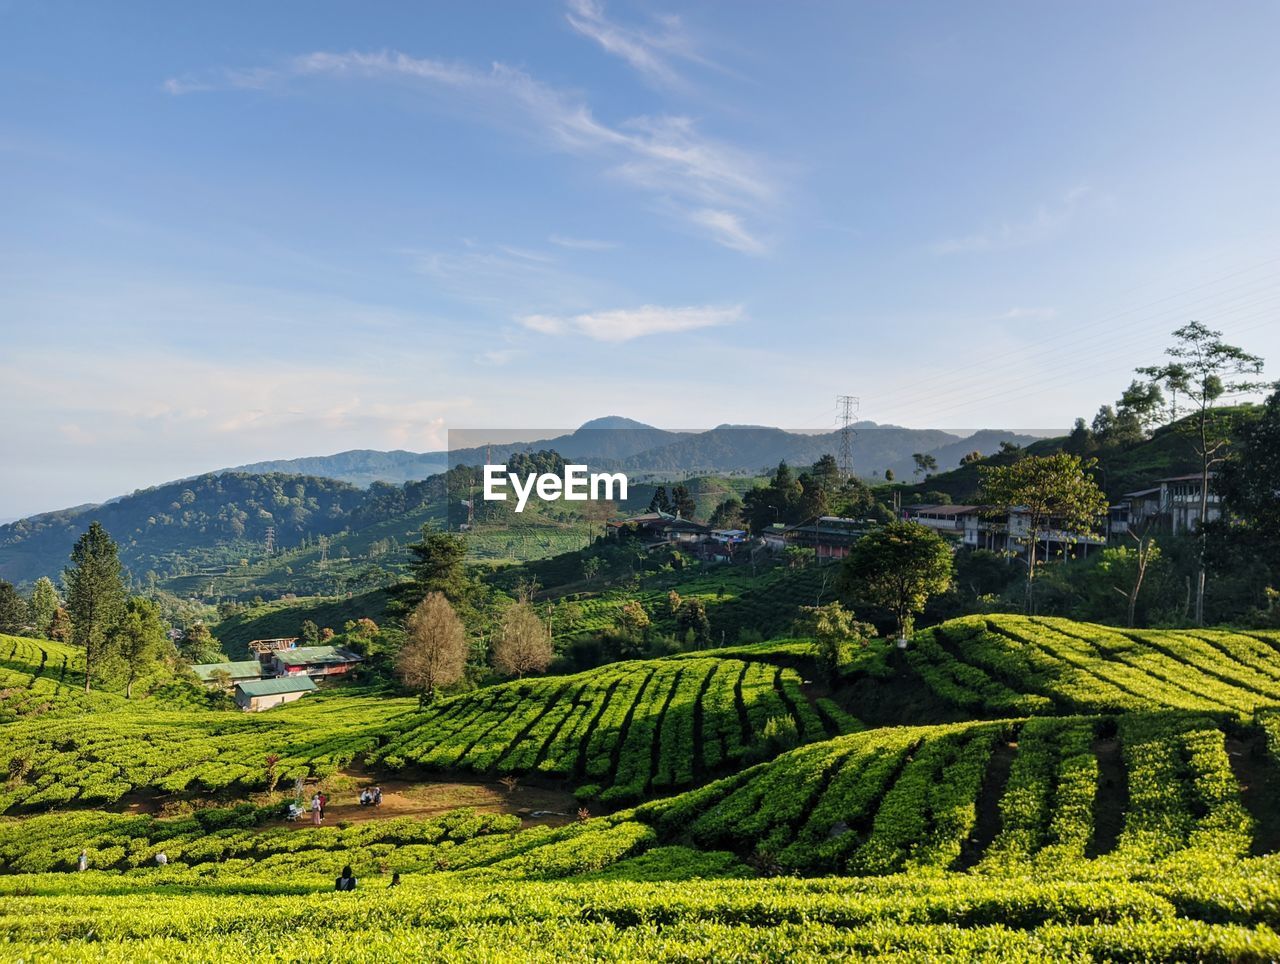 The expanse of green tea plantations is like a rug against a bright blue sky background